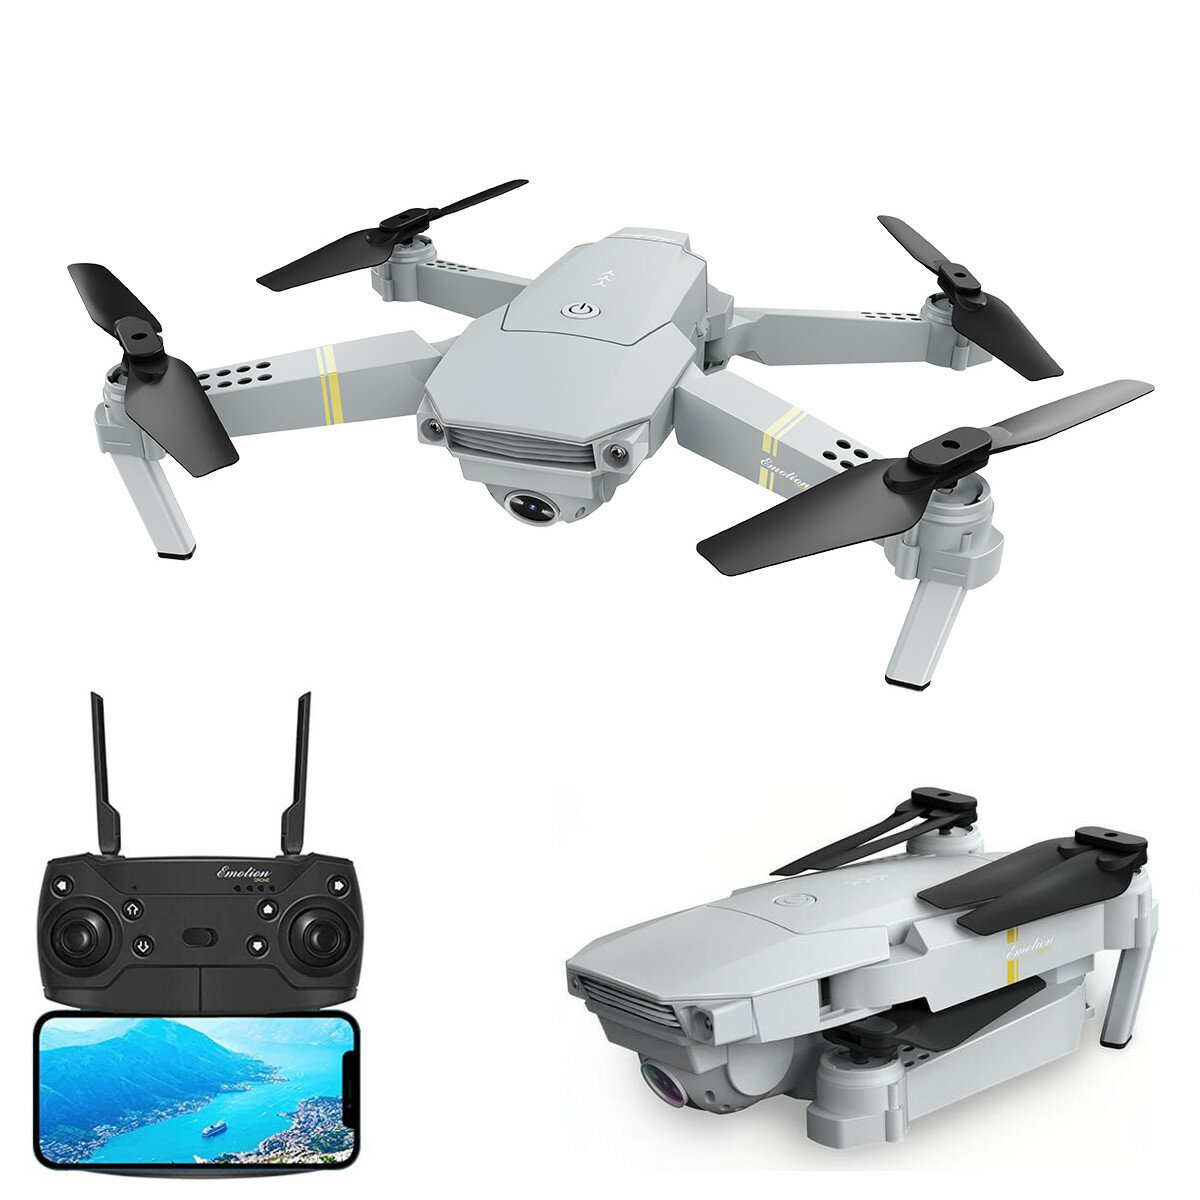 Image of Eachine E58 PRO WIFI FPV With 120° FOV 1080P HD Camera Adjustment Angle High Hold Mode Foldable RC Drone Quadcopter RTF